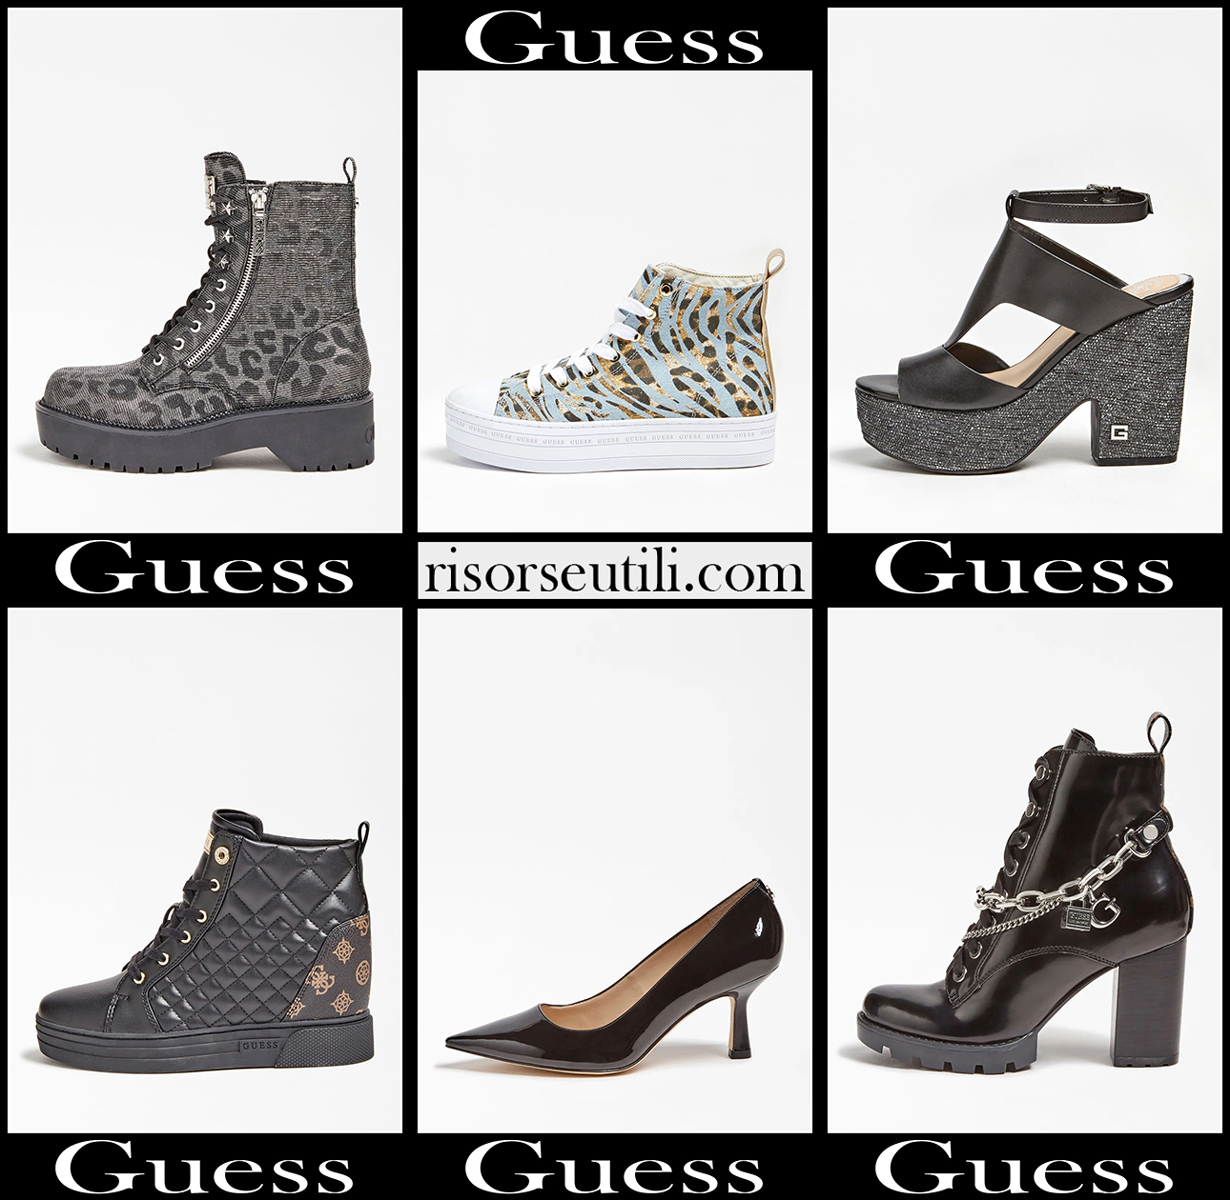 Guess shoes 2020 new arrivals womens footwear